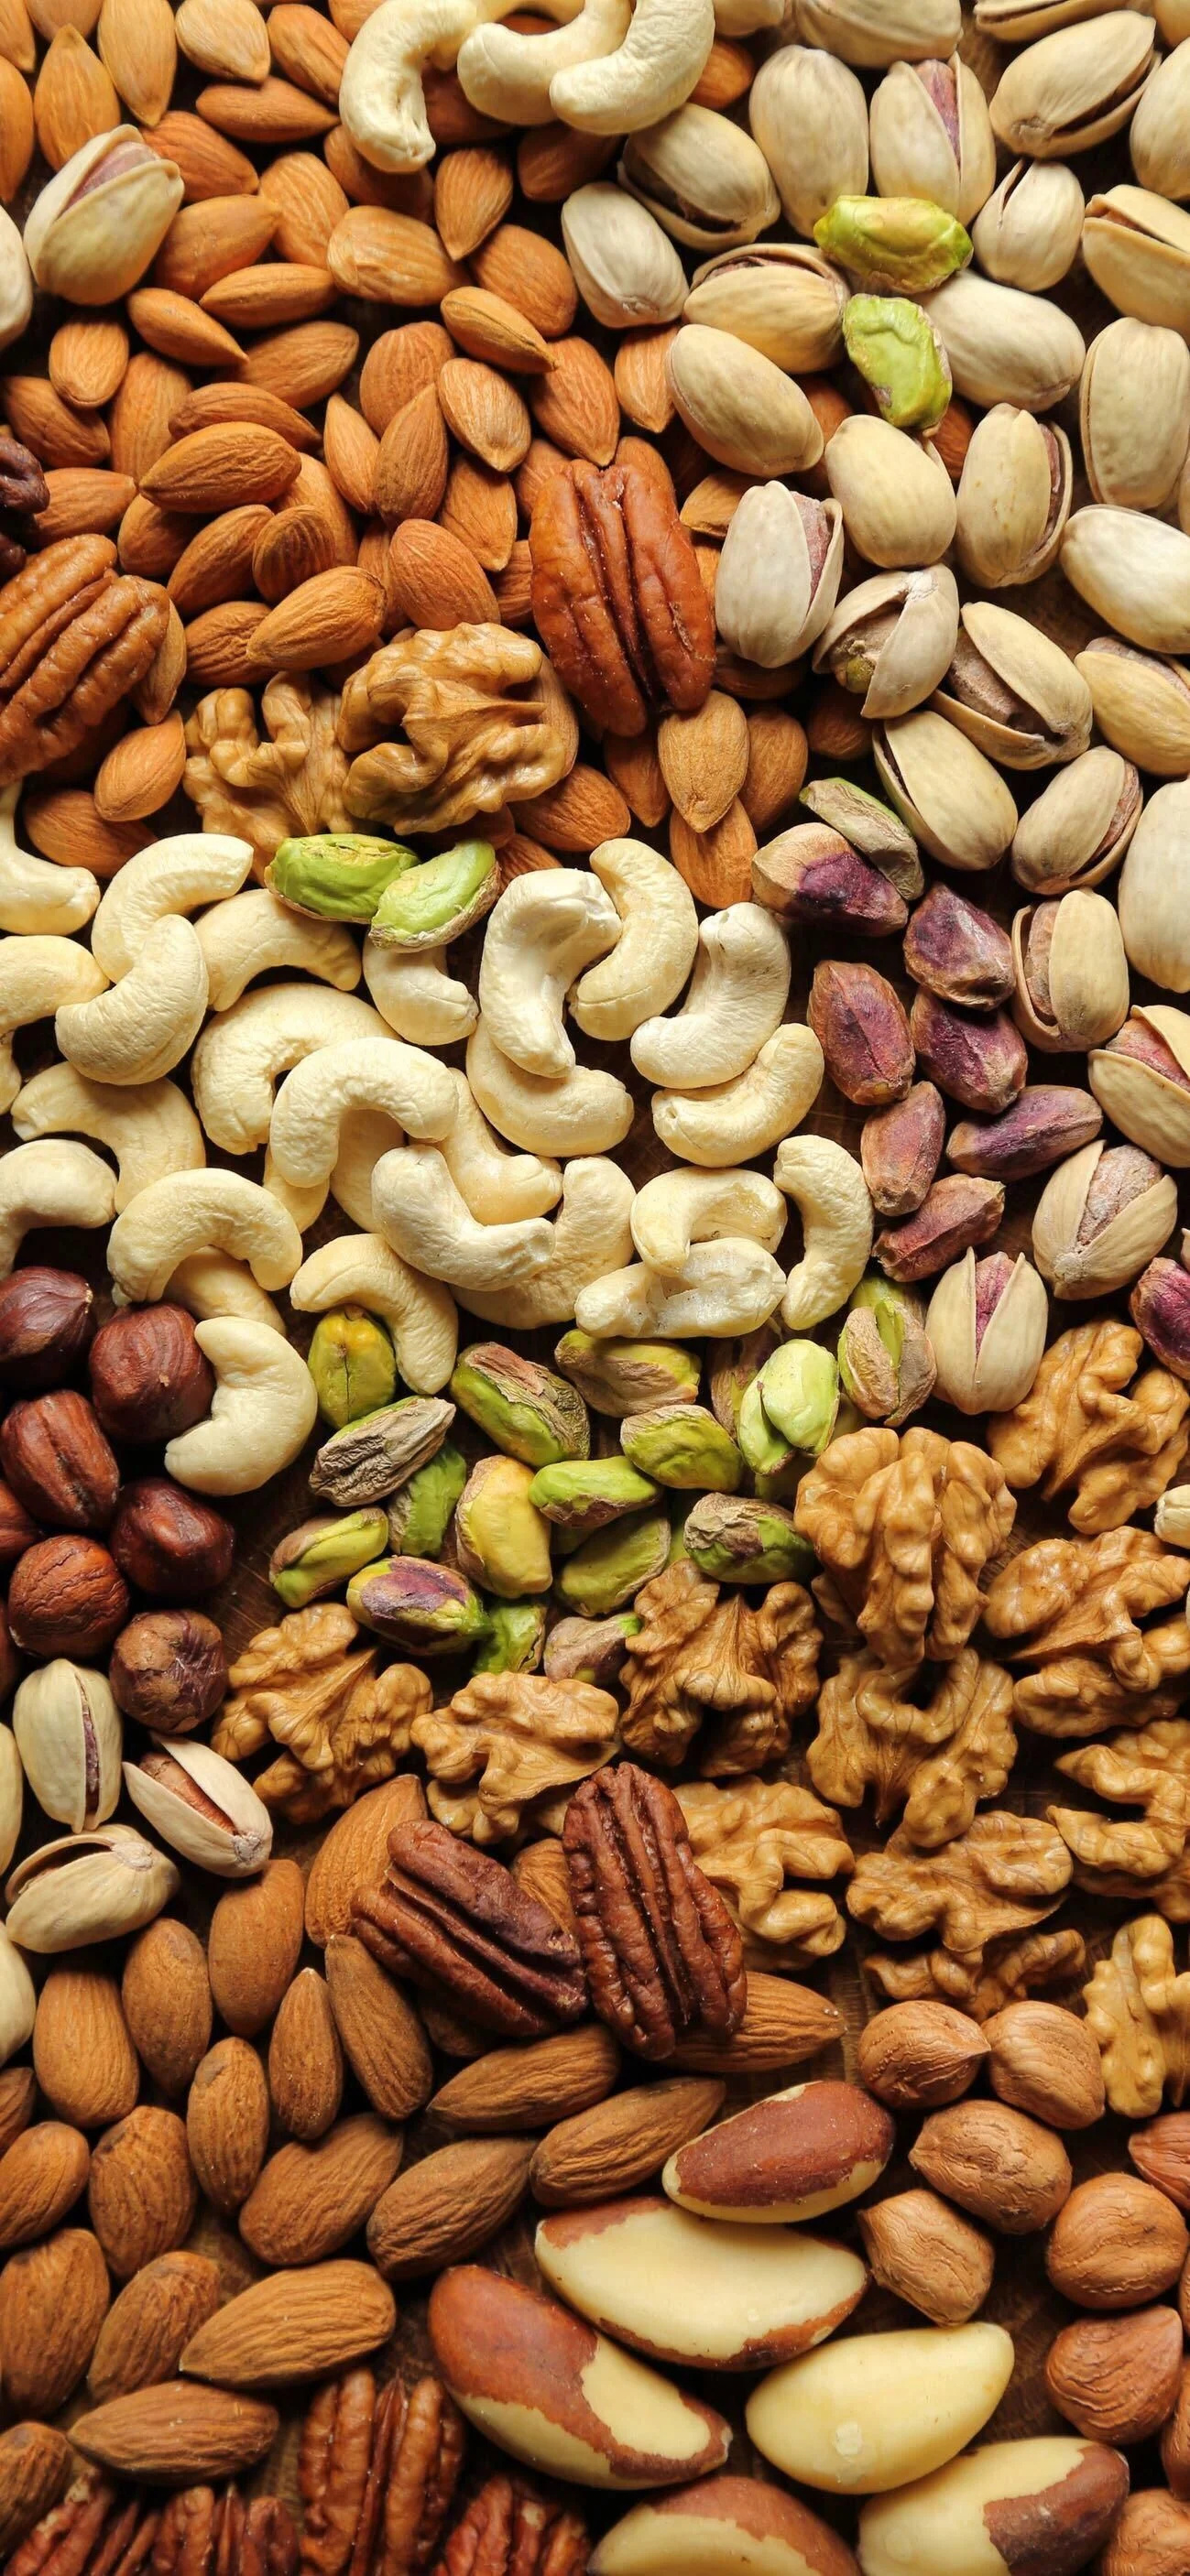 Nuts: Dry fruits, Edible seed kernels encased in a hard shell. 1300x2820 HD Wallpaper.